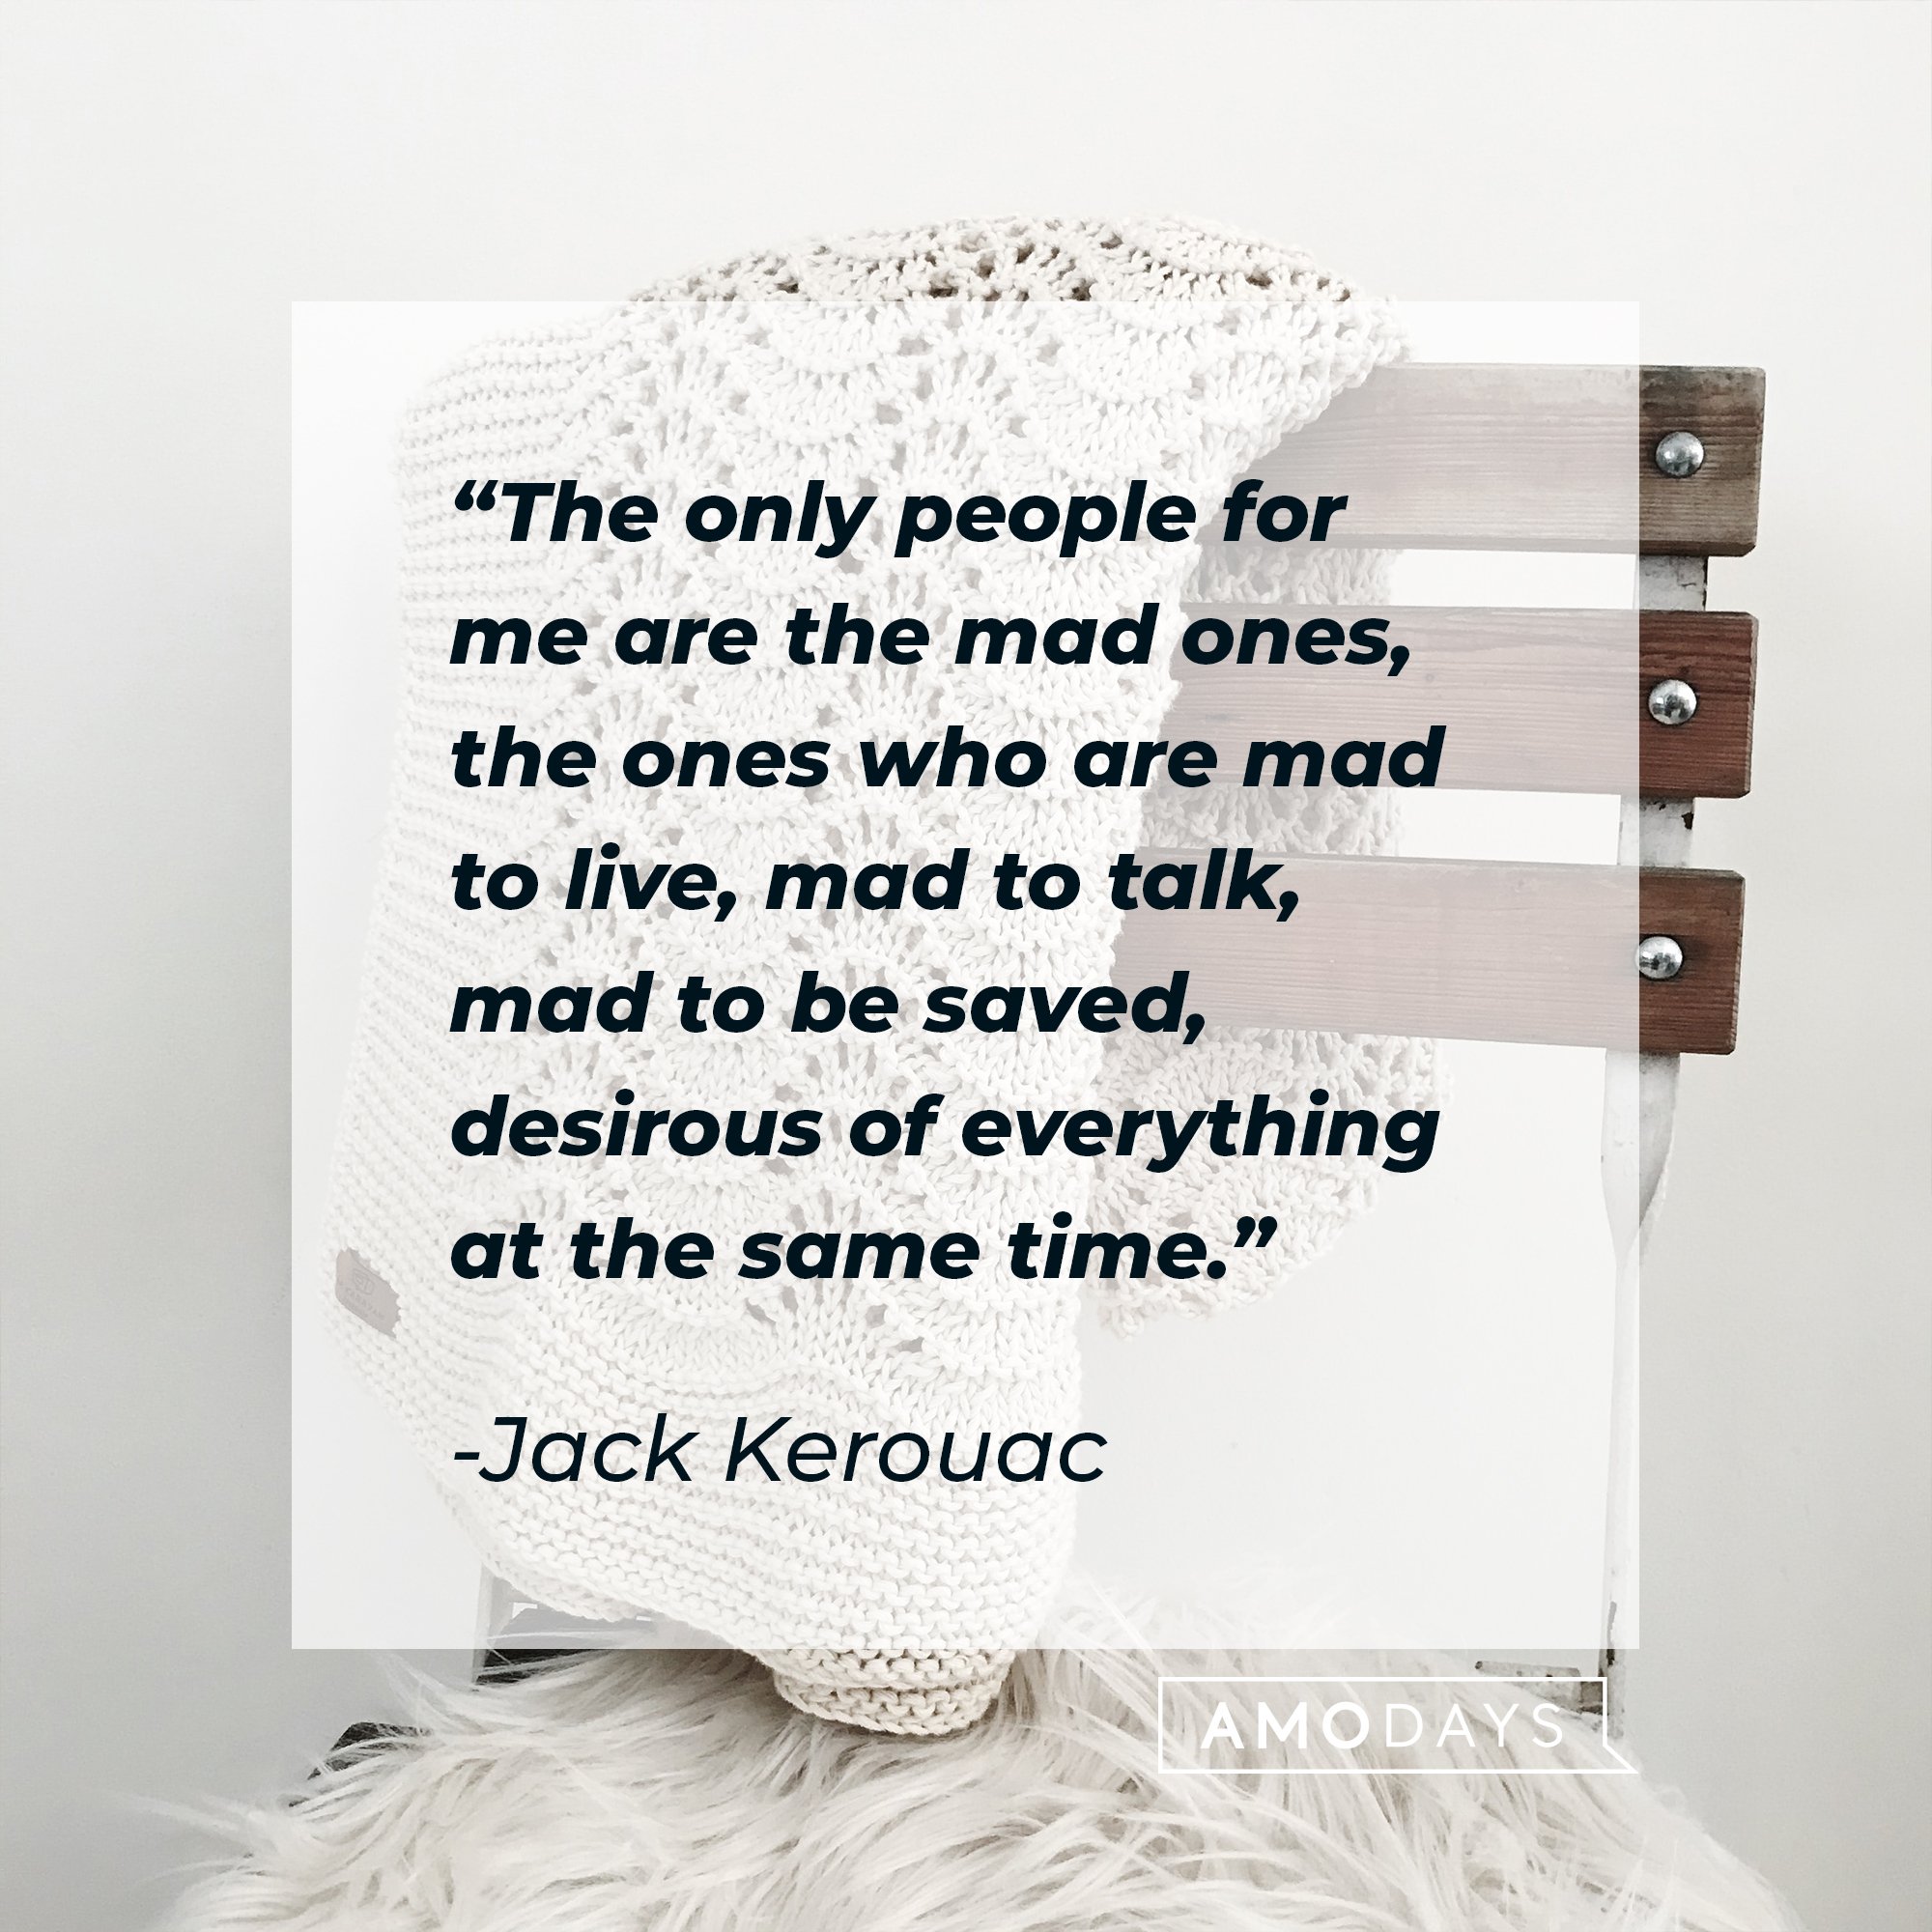  Jack Kerouac's quote: "The only people for me are the mad ones, the ones who are mad to live, mad to talk, mad to be saved, desirous of everything at the same time." | Image: AmoDays 